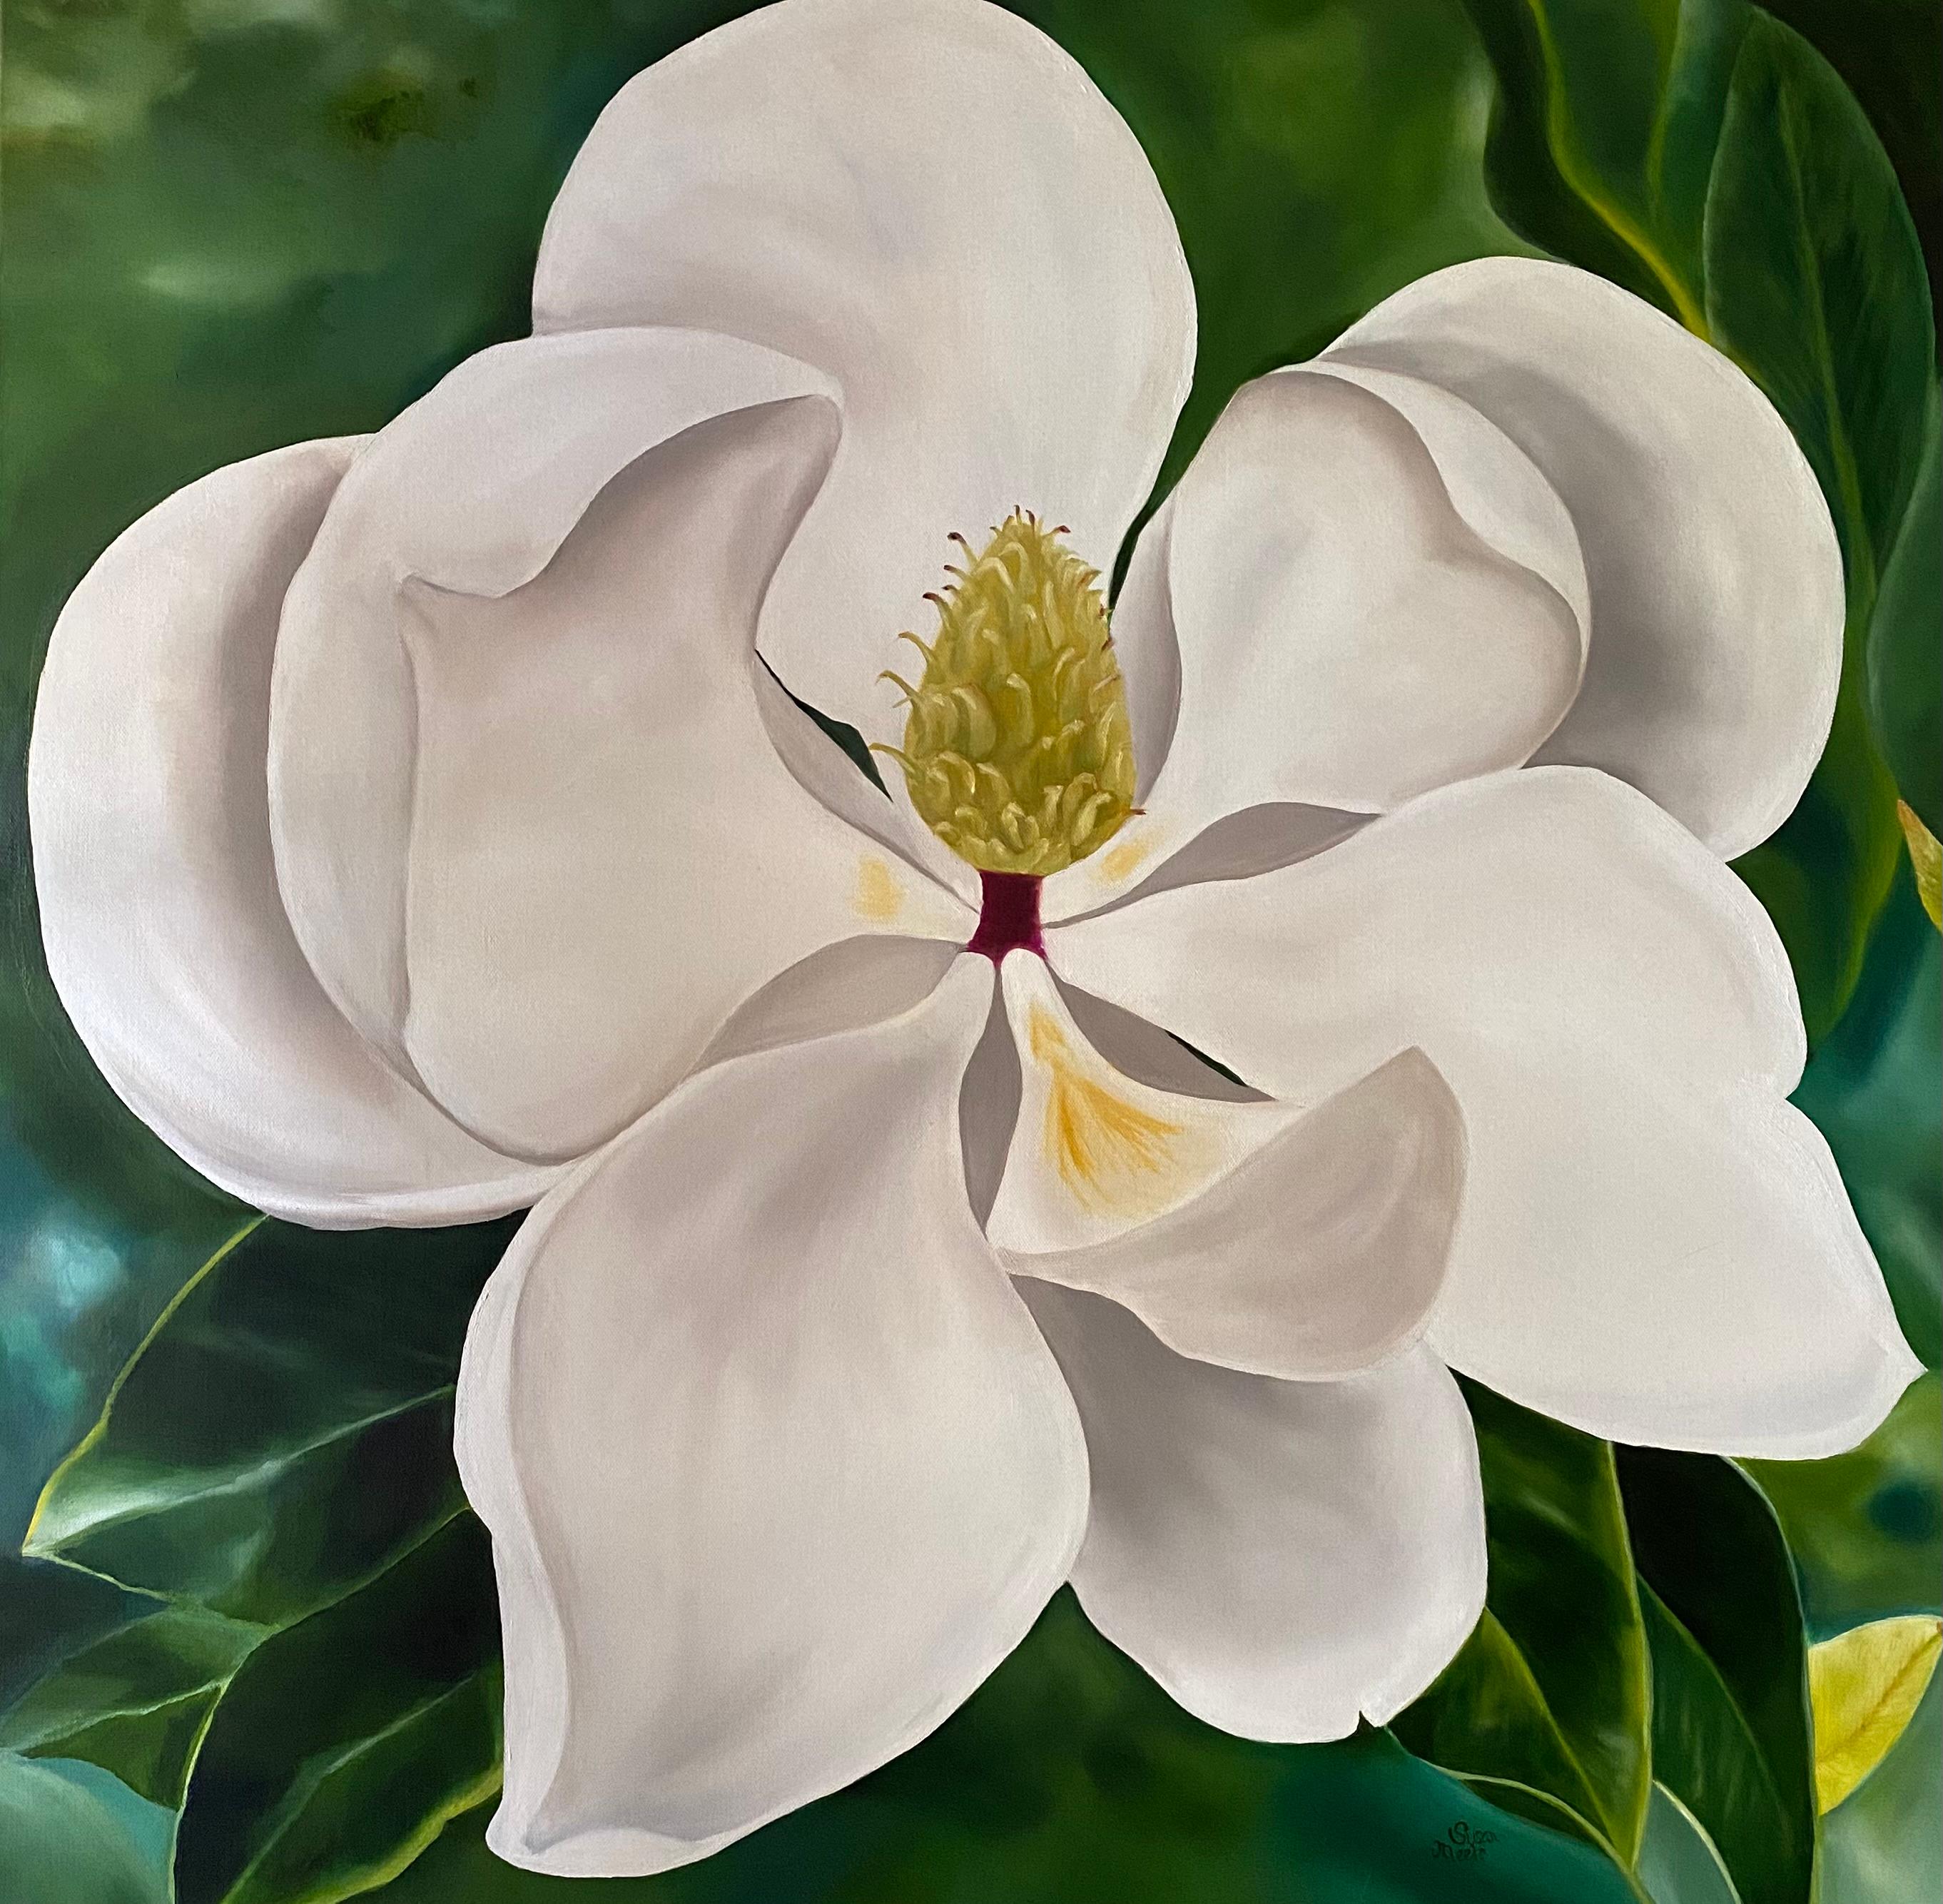 Susan Meeks Landscape Painting -  Giant Magnolia  Realism 36 x 36 Oil on Canvas Gallery Wrapped   Floral